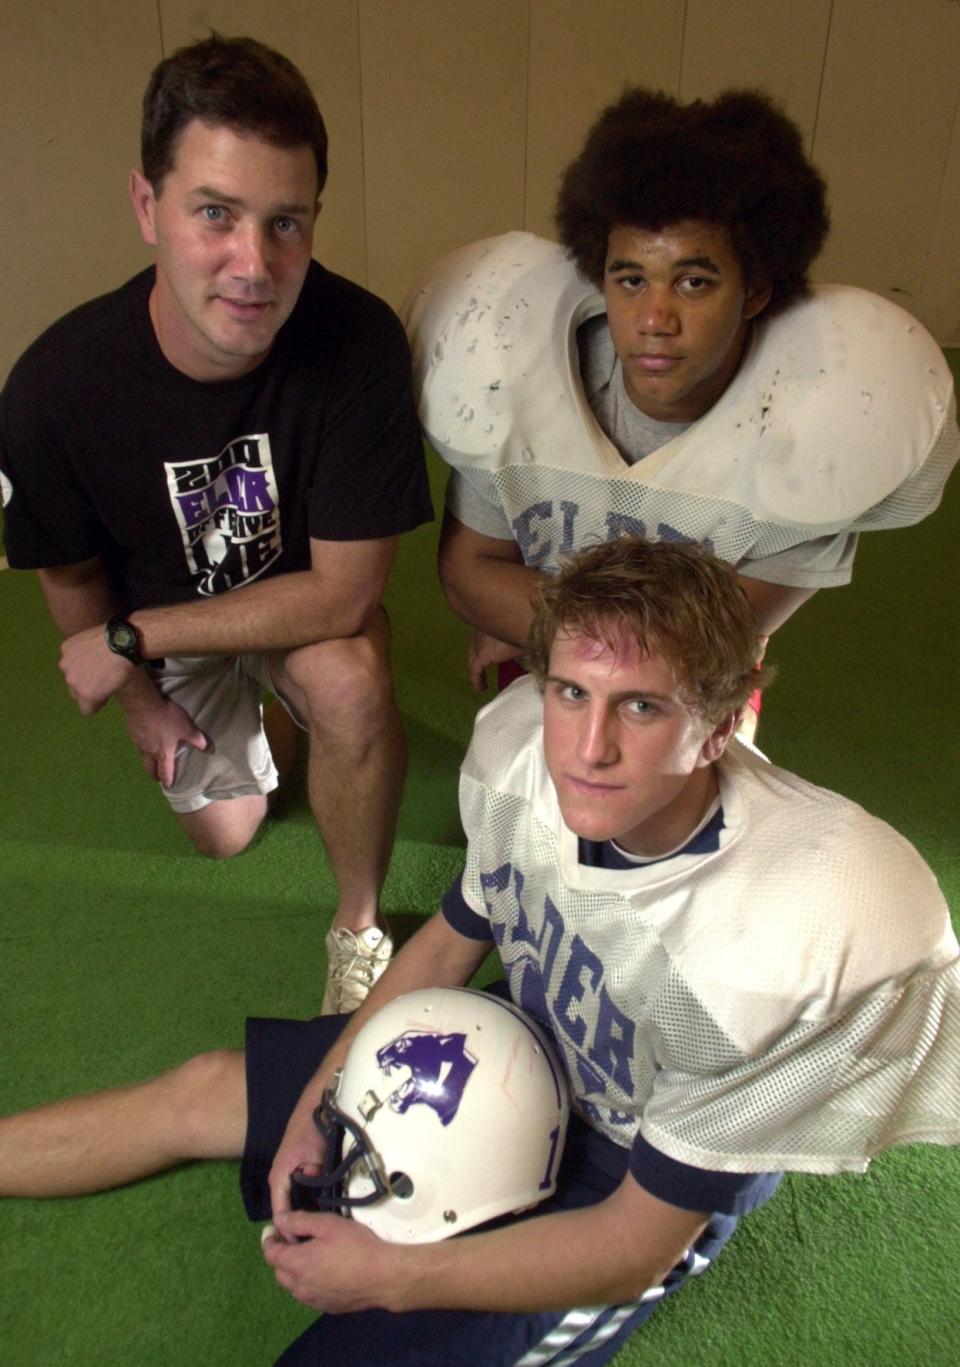 Elder High School head football coach Doug Ramsey, rear left, photographed with players, Rob Florian, quarterback, front, and Bradley Glatthaar, running back, rear right, during a break in practice Tuesday November 18, 2003 at The Western Sports Mall.